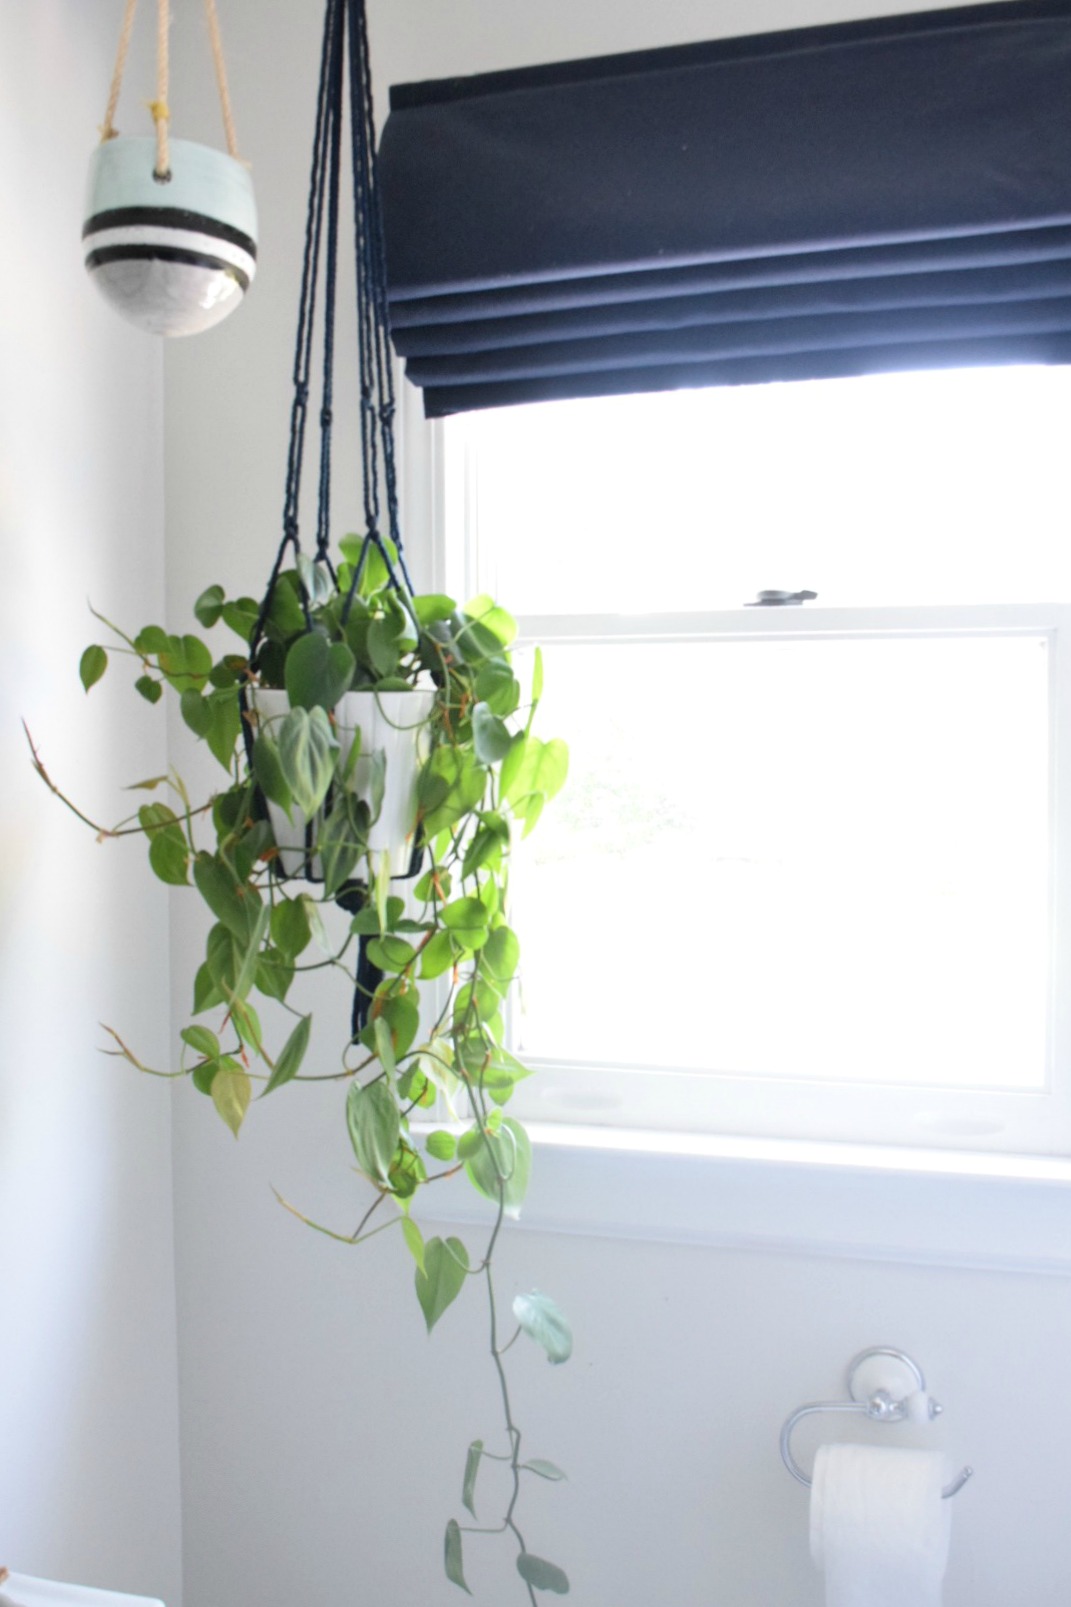 House Plants- My Top House Plants That Can Be Left Alone